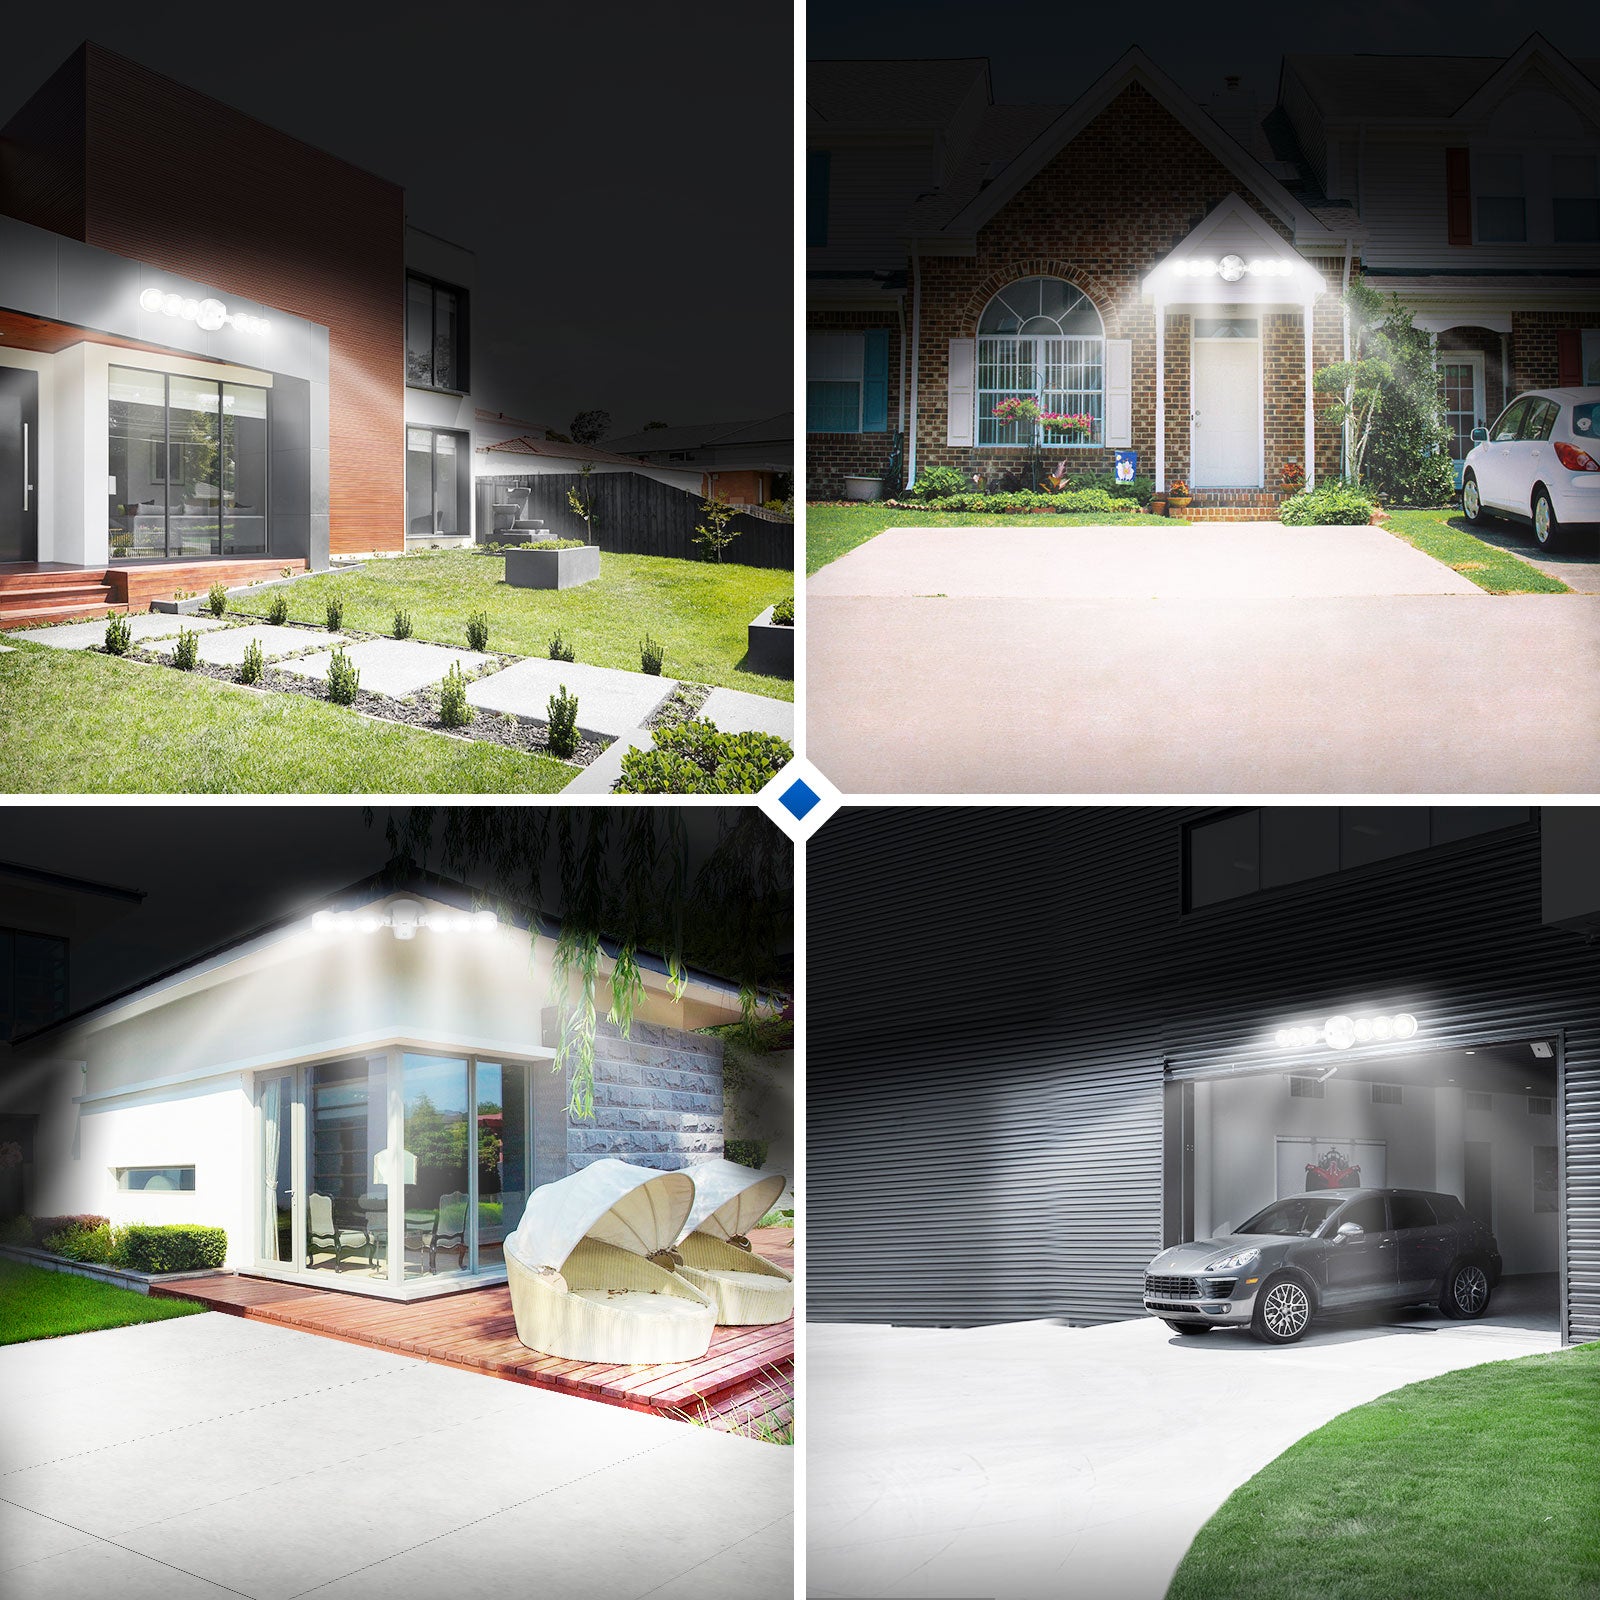 45W LED Security Light (Dusk to Dawn) suitable for yard, garage and extra